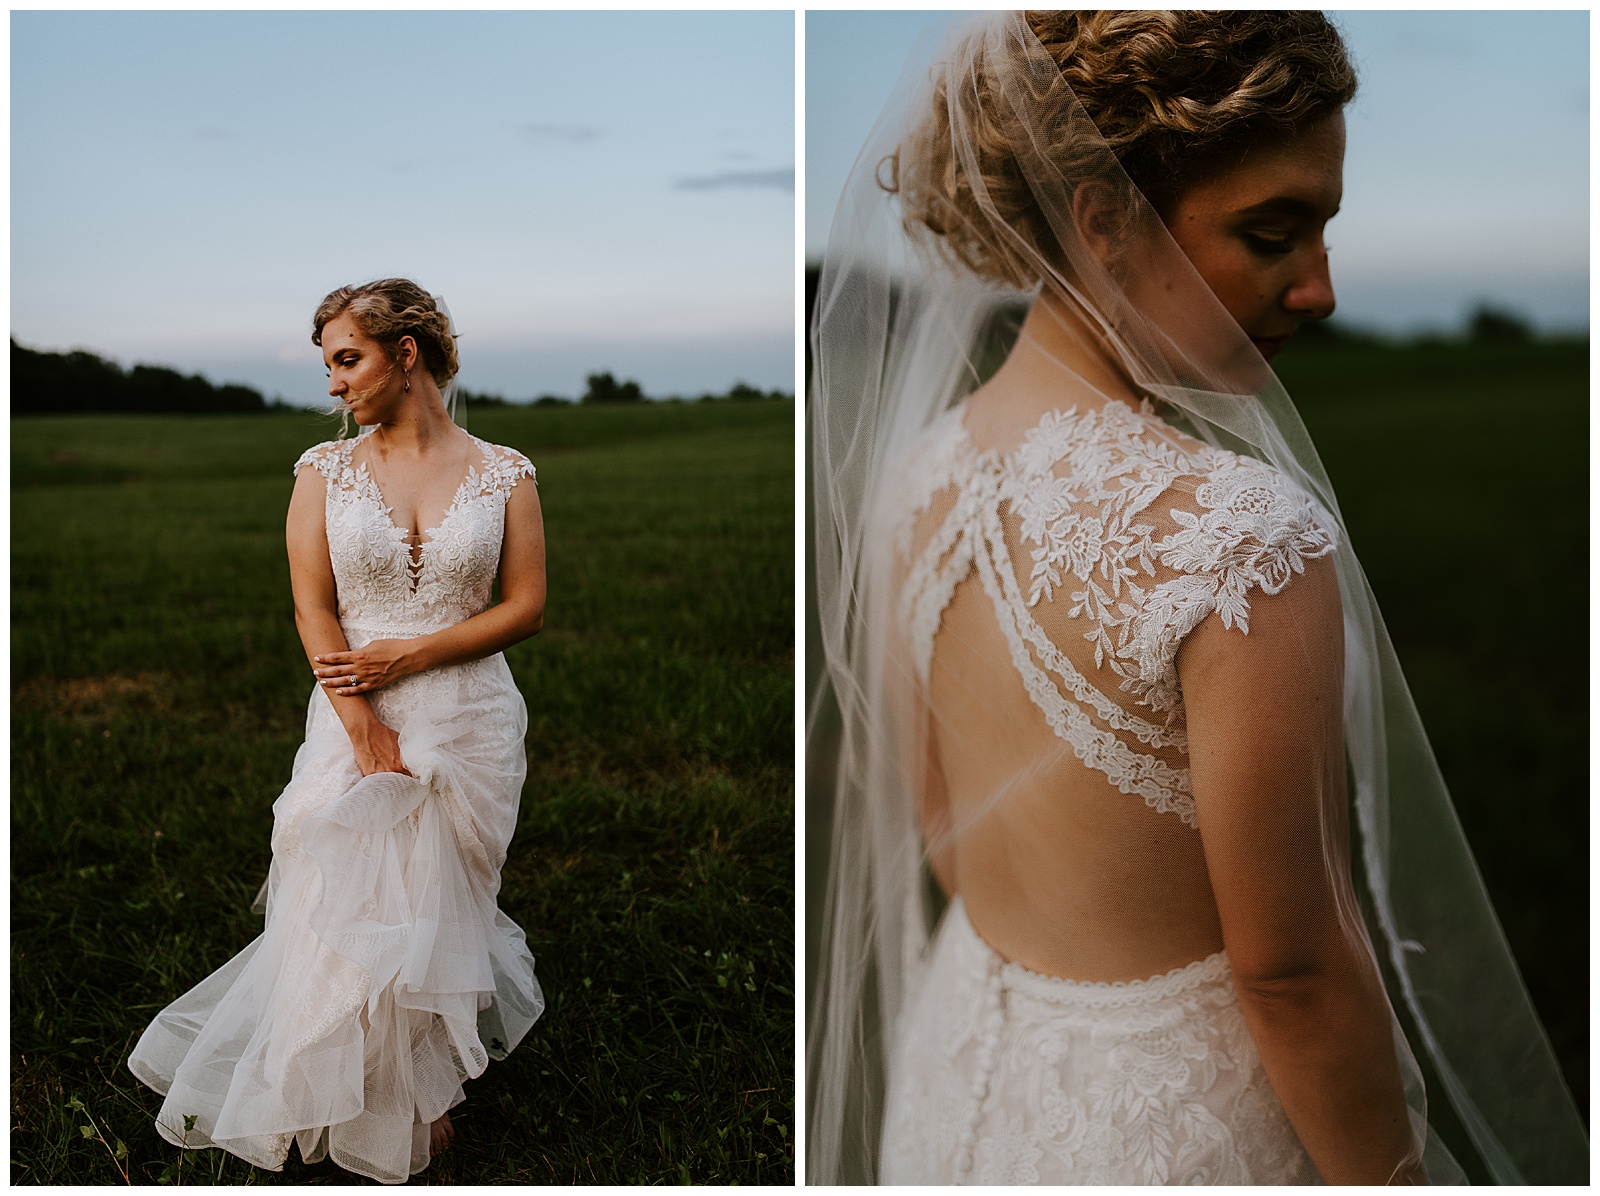 dreamy bridal portraits, romantic and intimate wedding pictures, pride and prejudice wedding, emotional wedding, emotional bride and groom, sunset wedding photos